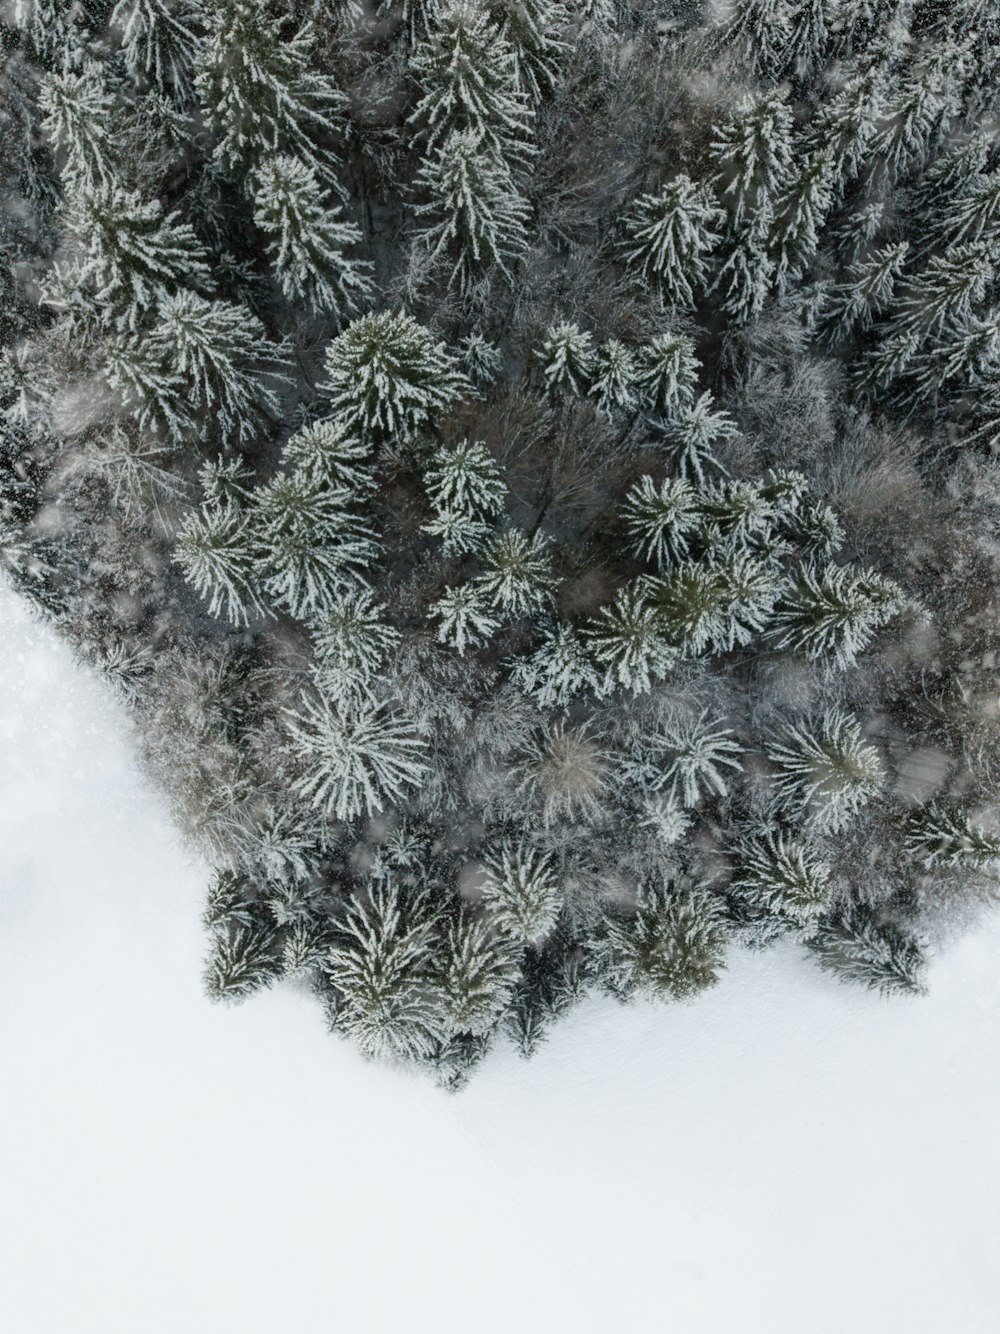 an aerial view of a snow covered pine tree